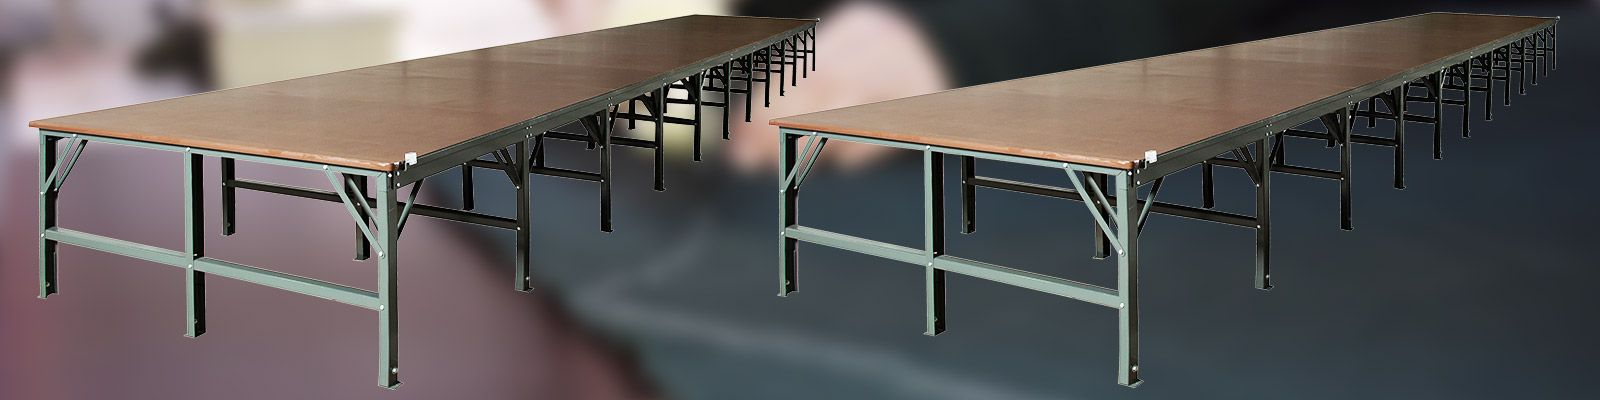 Export and Cutting Table Manufacturer in Gurgaon, Fabric Cutting Table Manufacturer in Gurgaon, Product Packaging Large Metal Table Manufacturer in Gurgaon, Best Quality Metal Table Fabrication Work in Gurgaon, Top Export Company Metal Table Manufacturer in Gurgaon